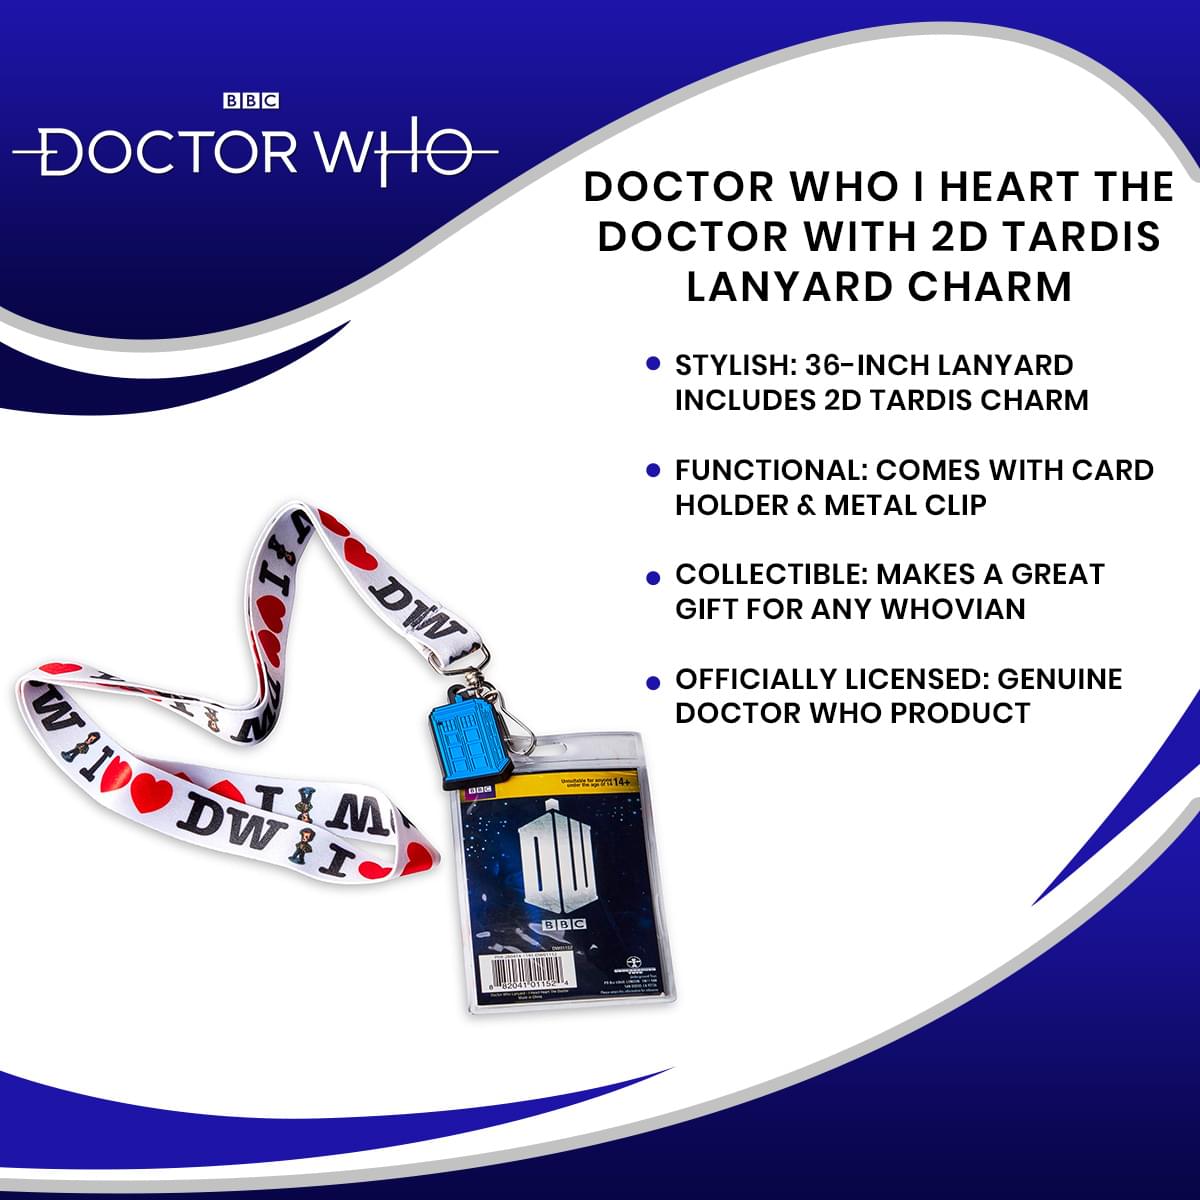 Doctor Who I Heart the Doctor with 2D TARDIS Lanyard Charm